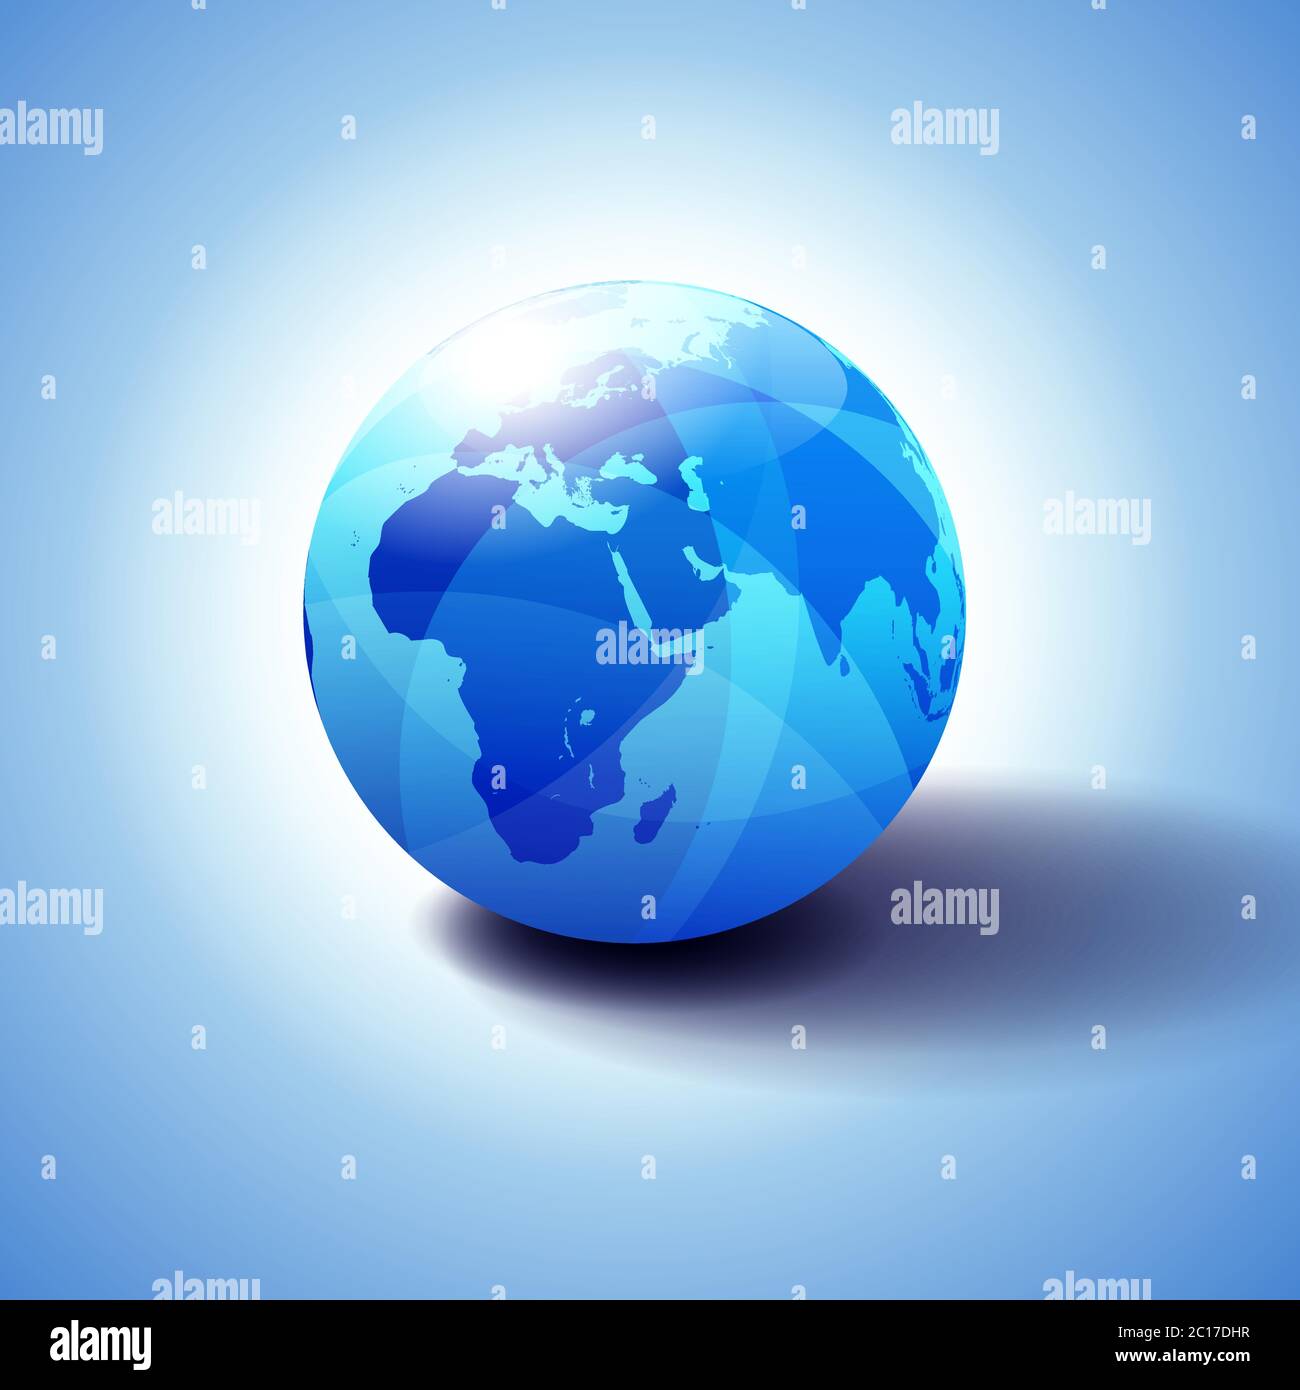 Africa, Middle East, Arabia and India Background with Globe Icon 3D illustration, Glossy, Shiny Sphere with Global Map in Subtle Blues Stock Vector